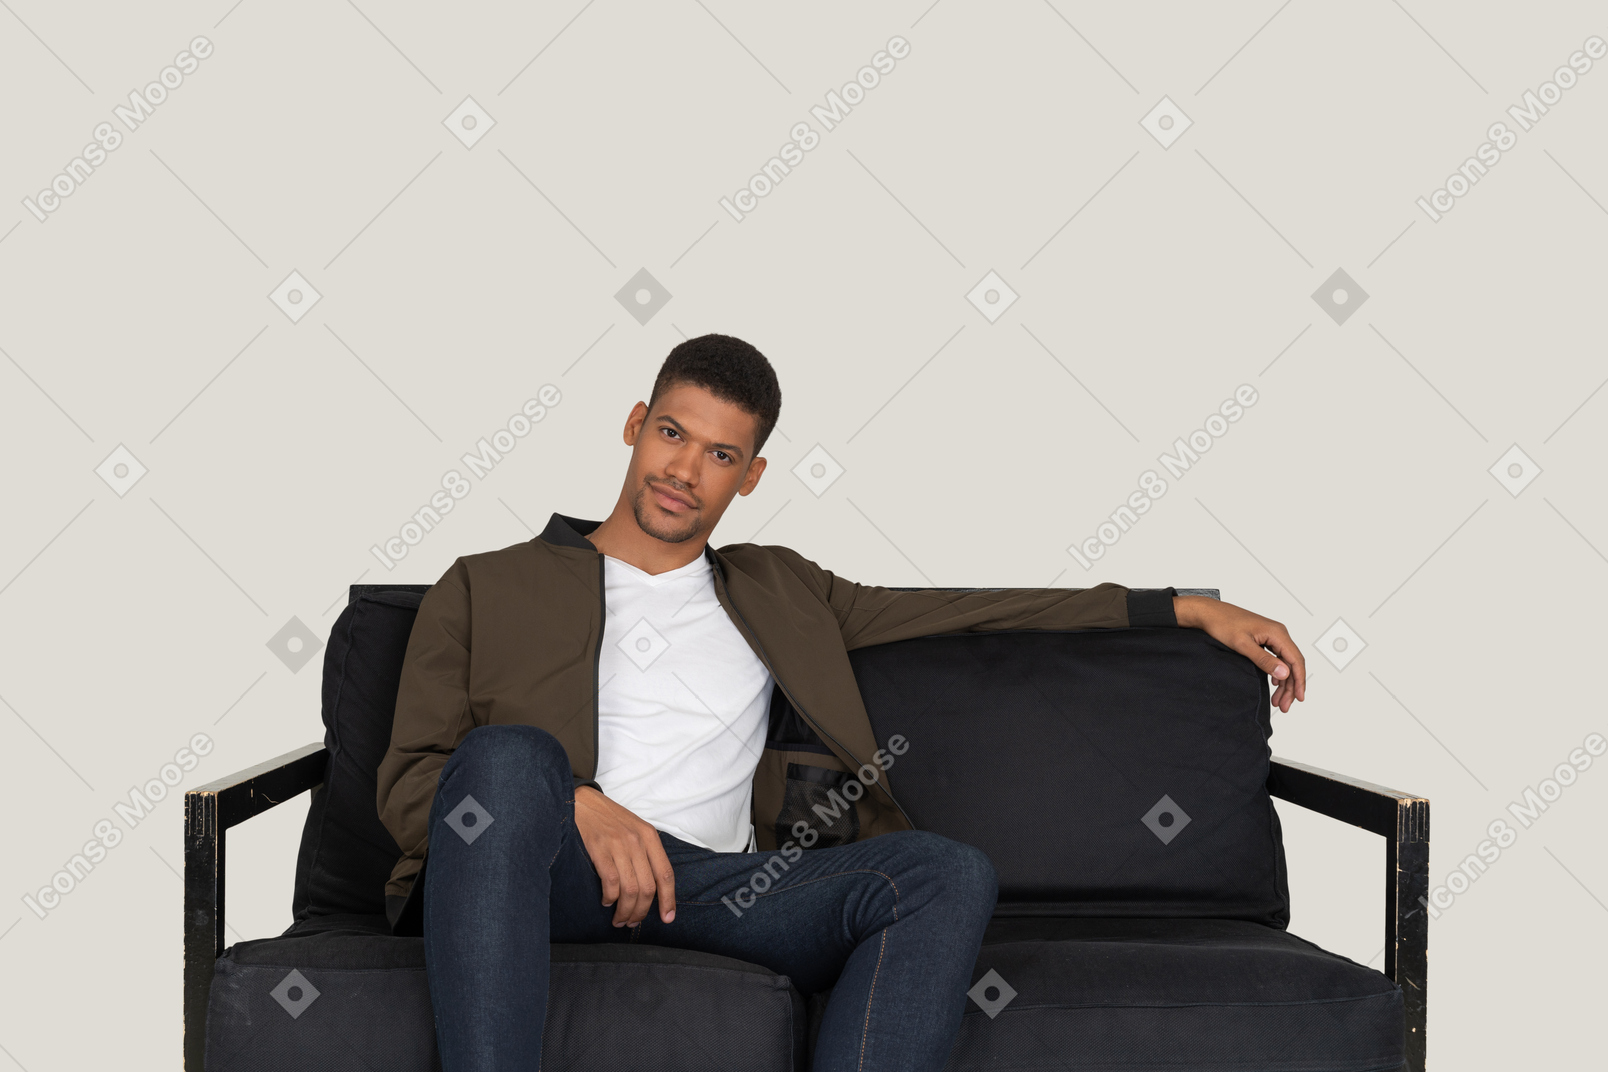 Smiling young man sitting on the sofa